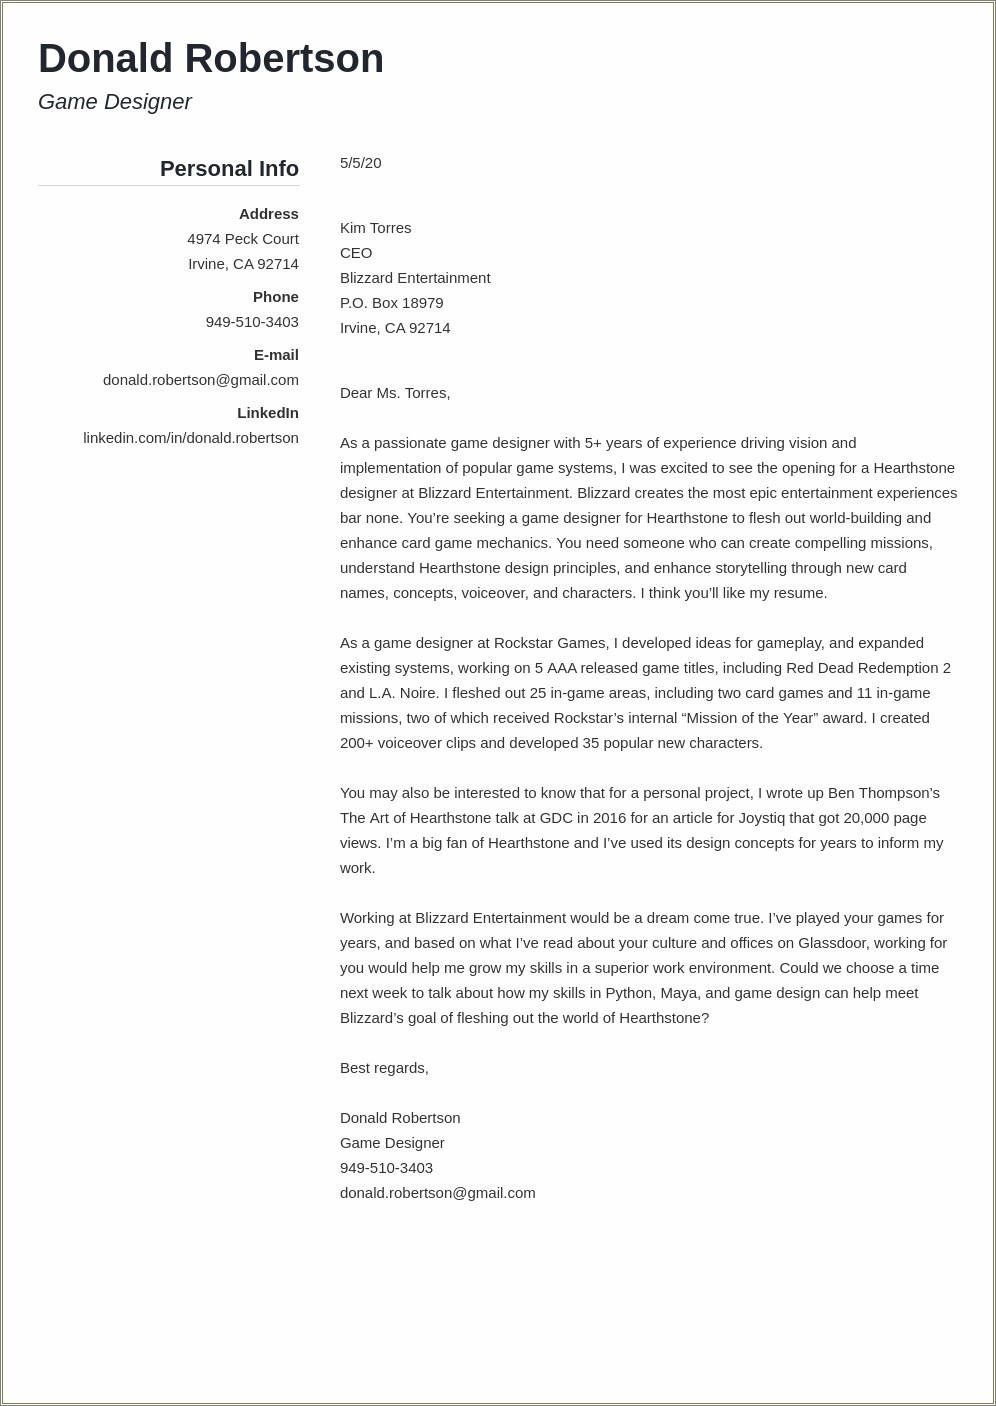 Sample Cold Contact Cover Letter For Resume